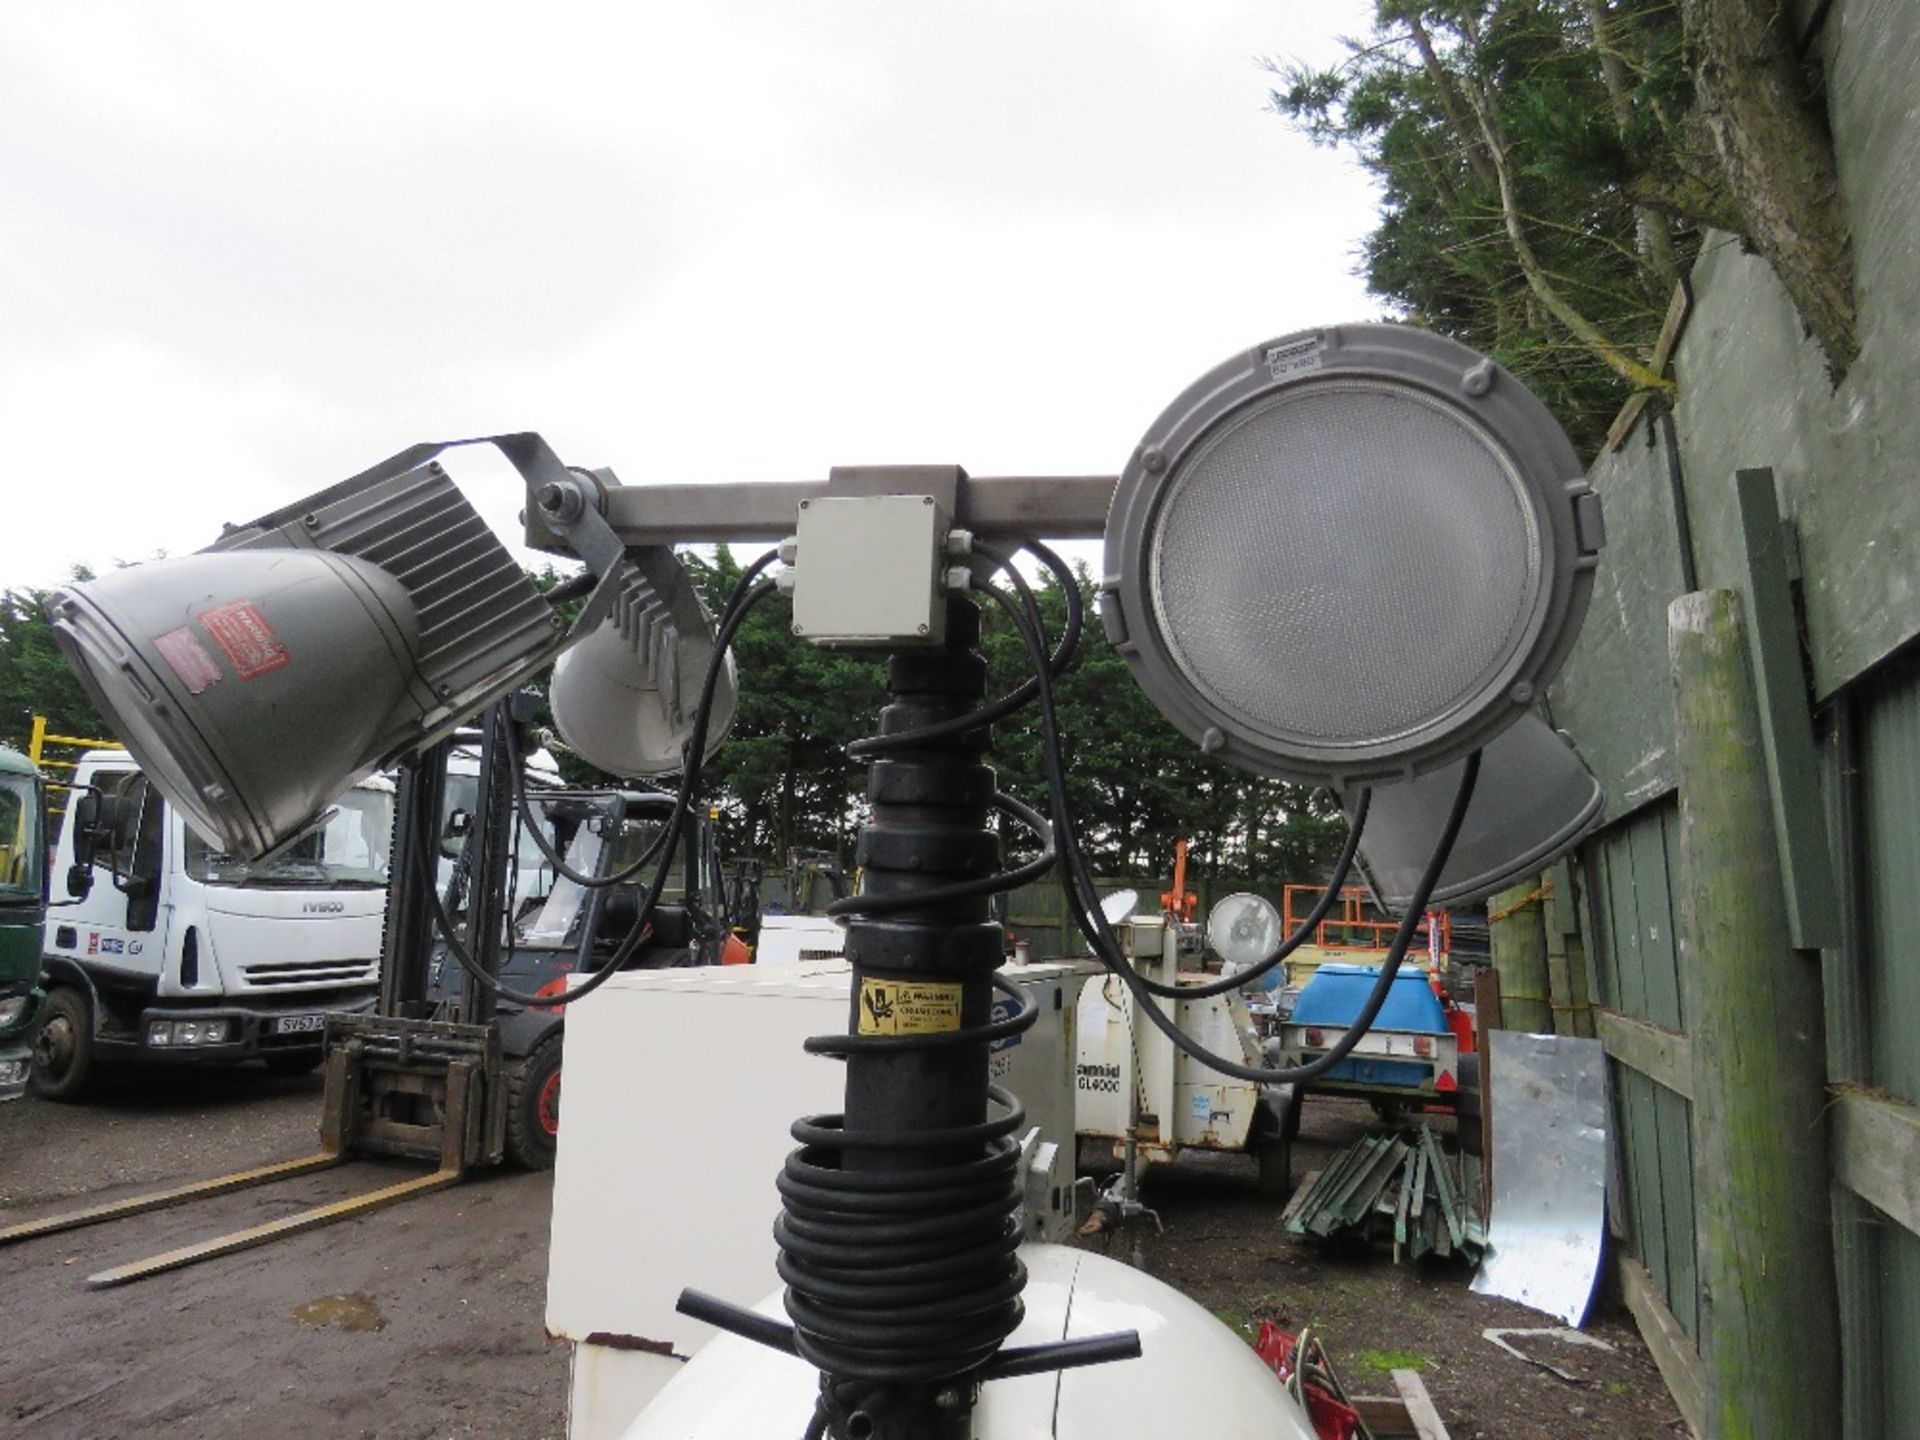 TCP ECOLITE TOWED LIGHTING TOWER, YEAR 2007 BUILD. SN:SETBC0750EM091063. WHEN TESTED WAS SEEN TO RUN - Image 6 of 8